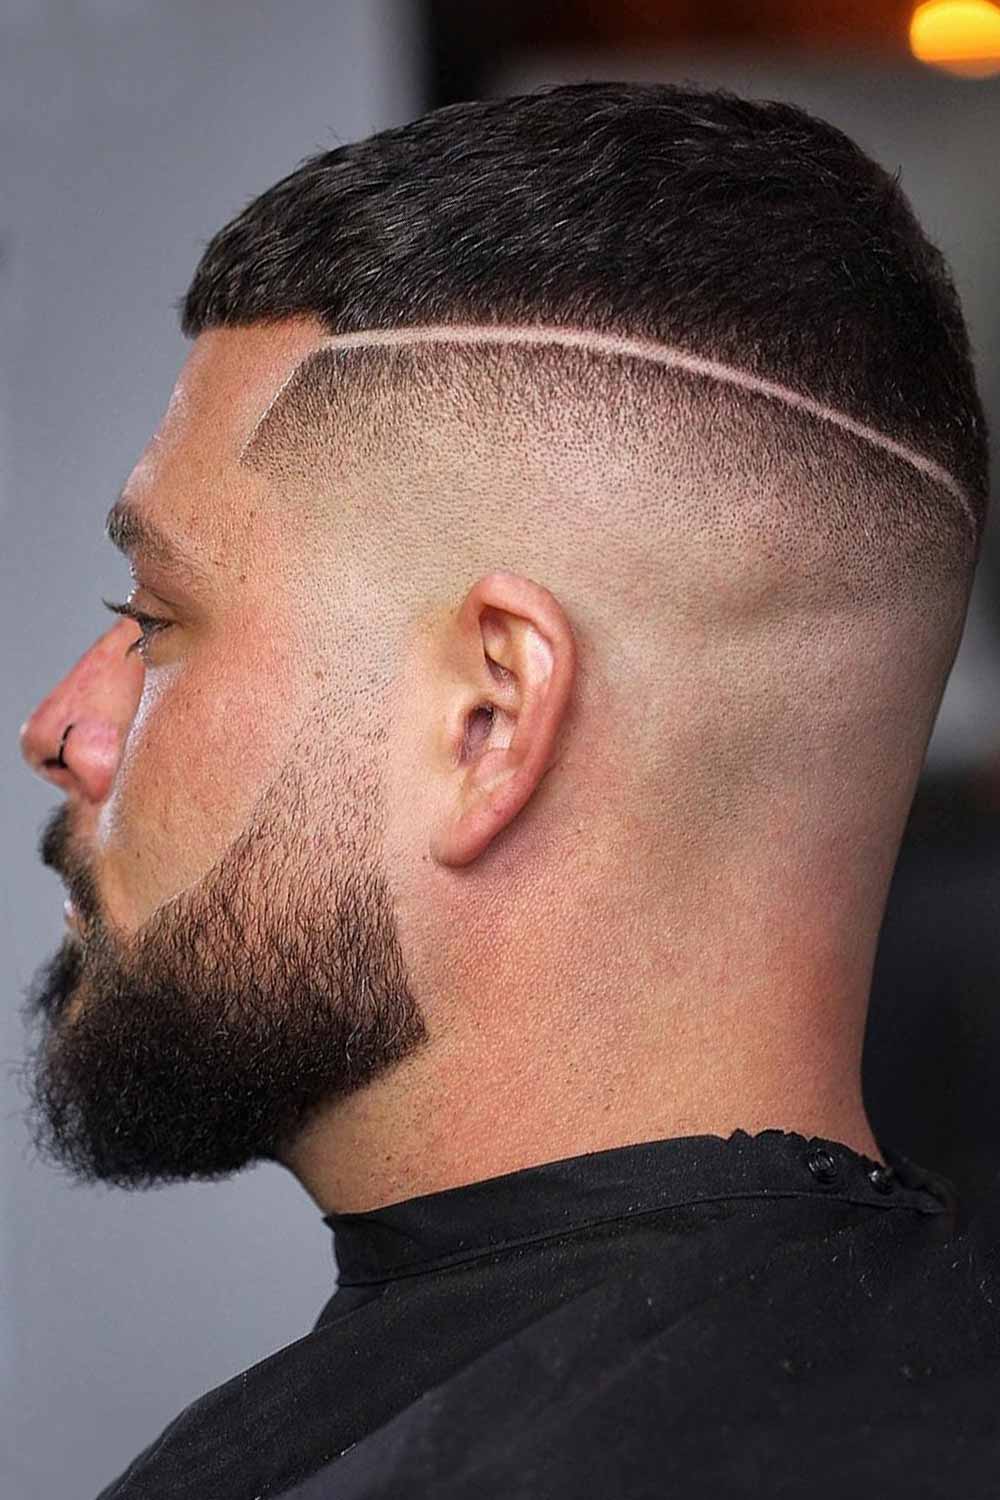 All The Useful Info About High And Tight Cuts | MensHaircuts.com